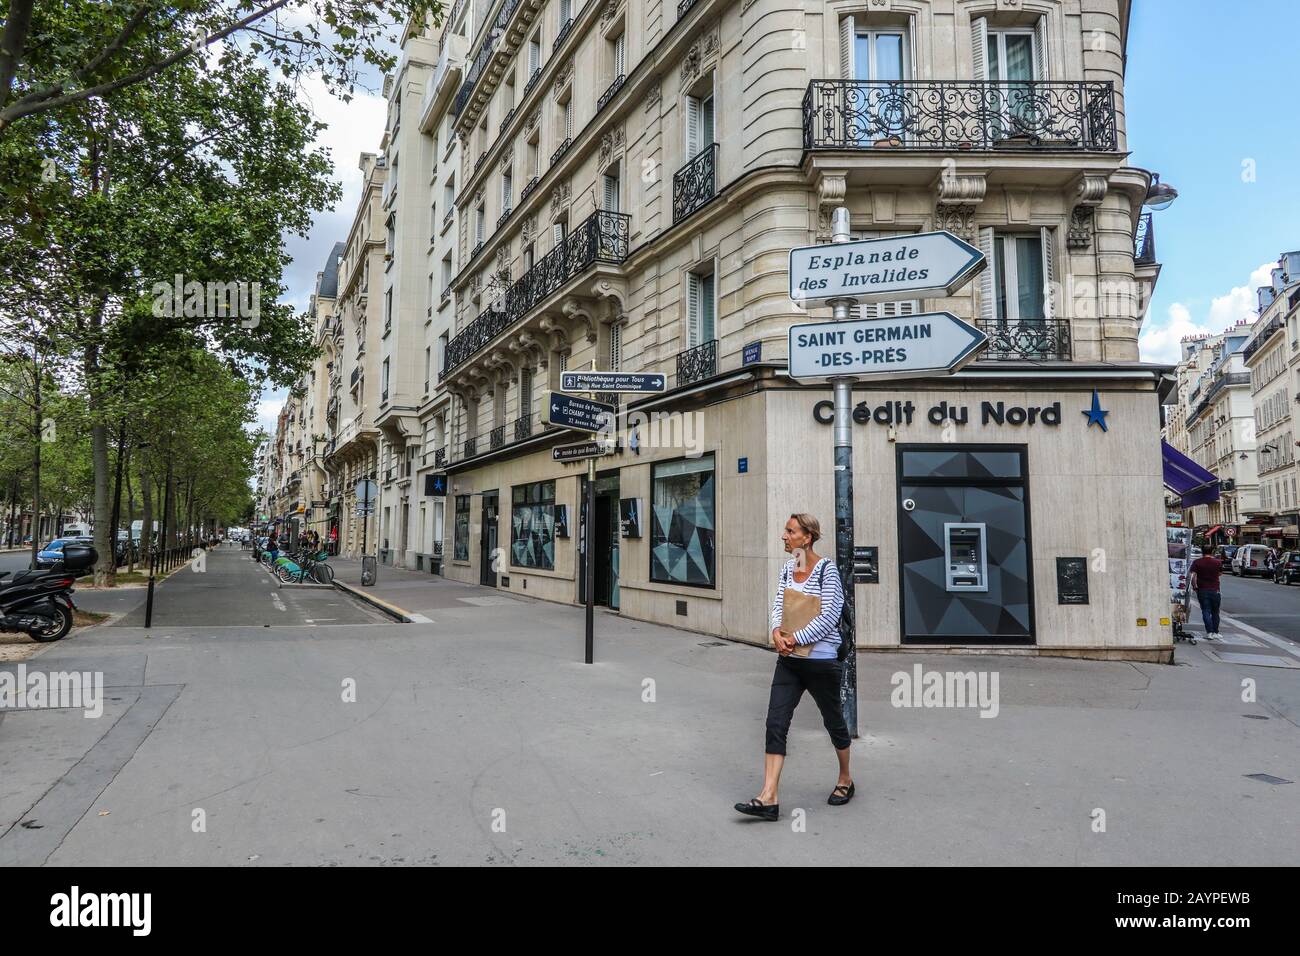 Credit du Nord and woman walking by in Paris, France, Europe Stock Photo